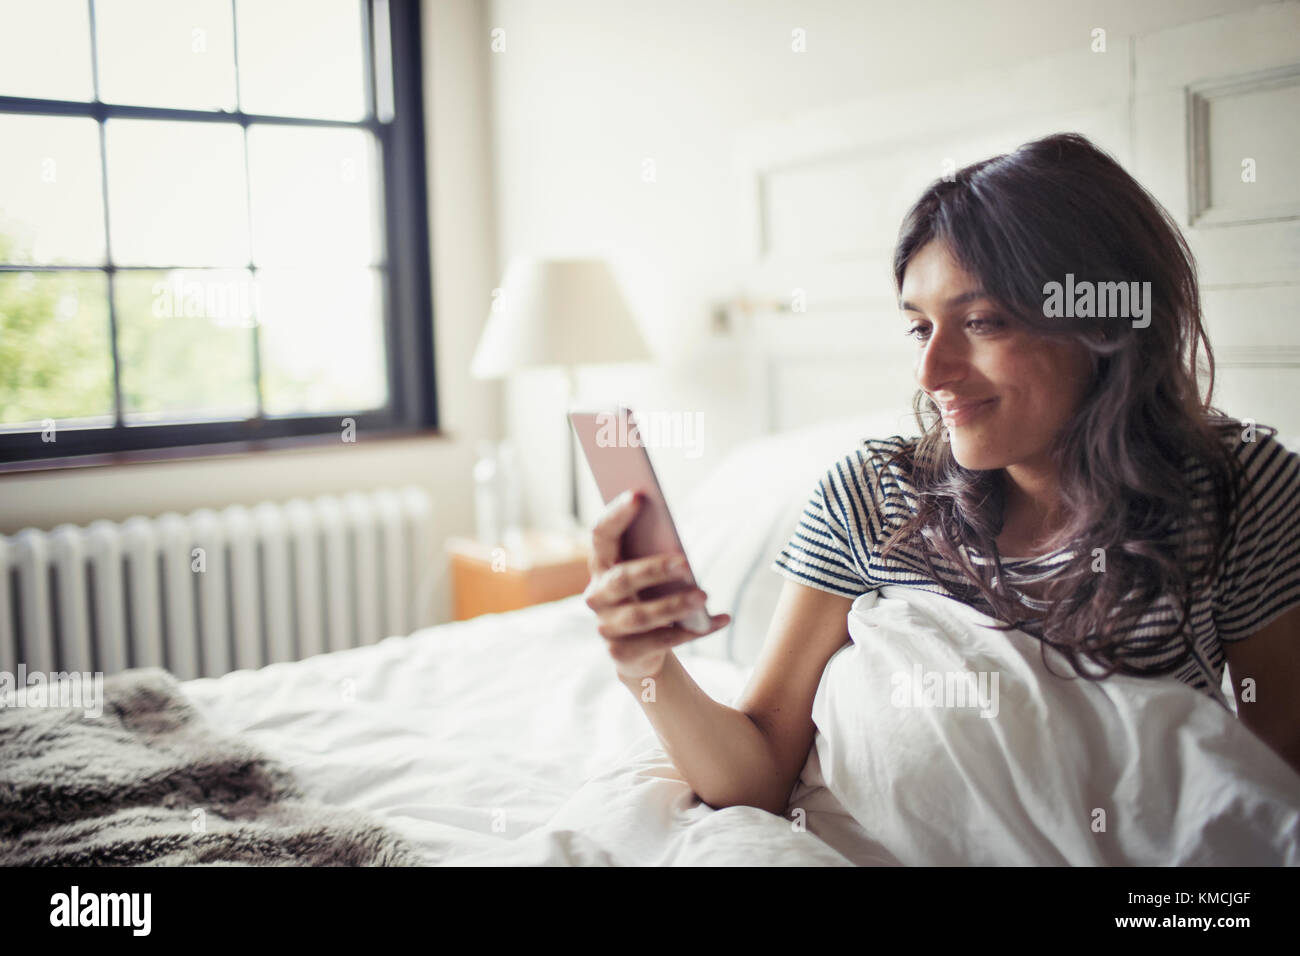 Young woman relaxing in bed, texting with smart phone Stock Photo